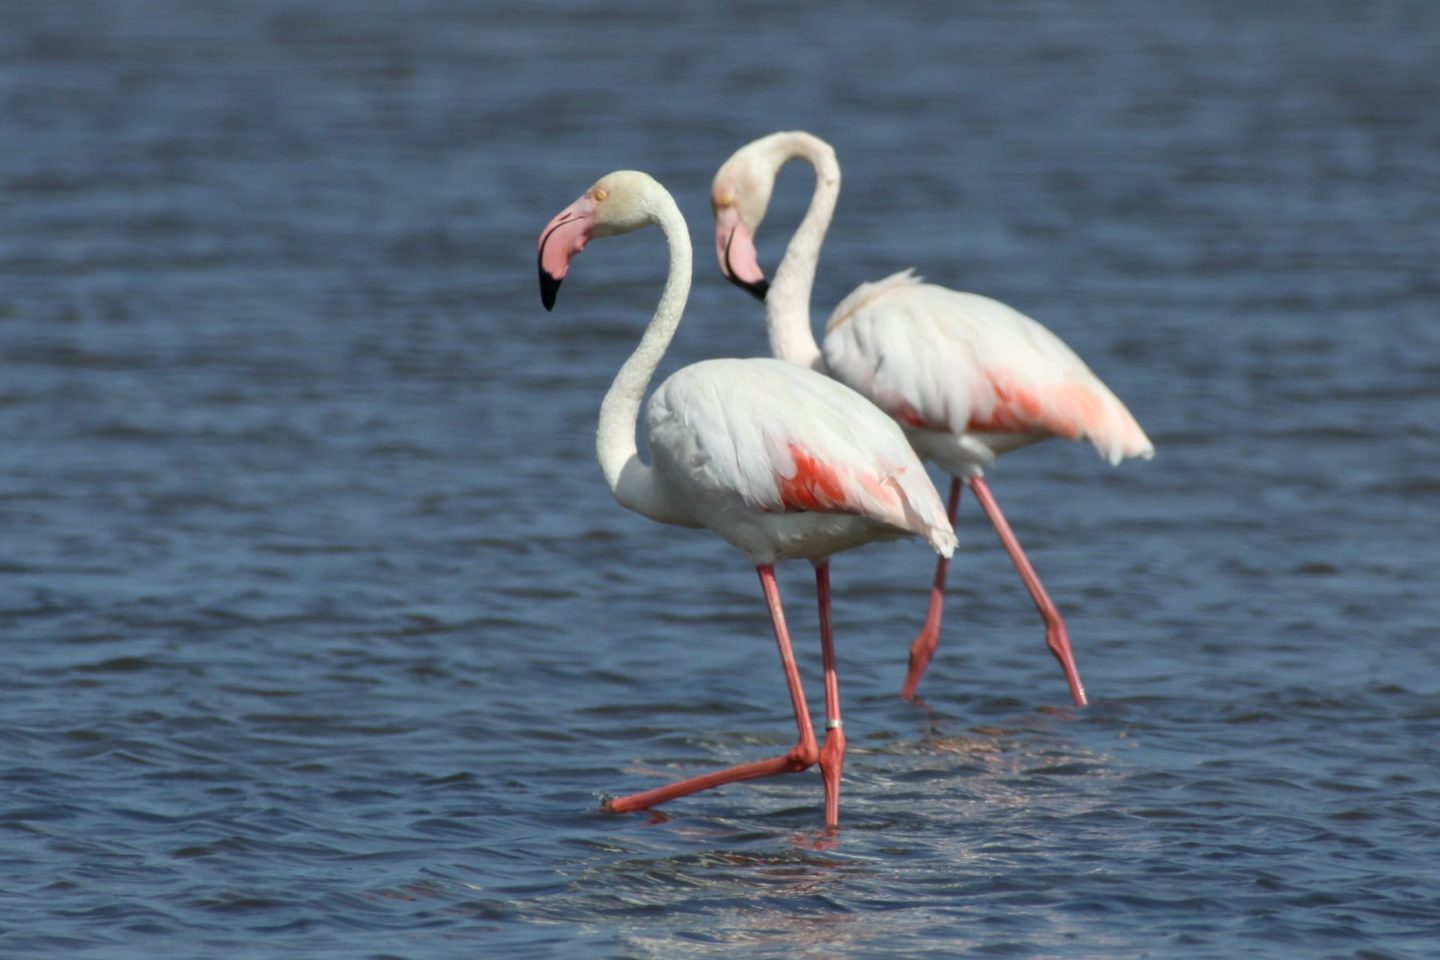 Where to see flamingos in Algarve